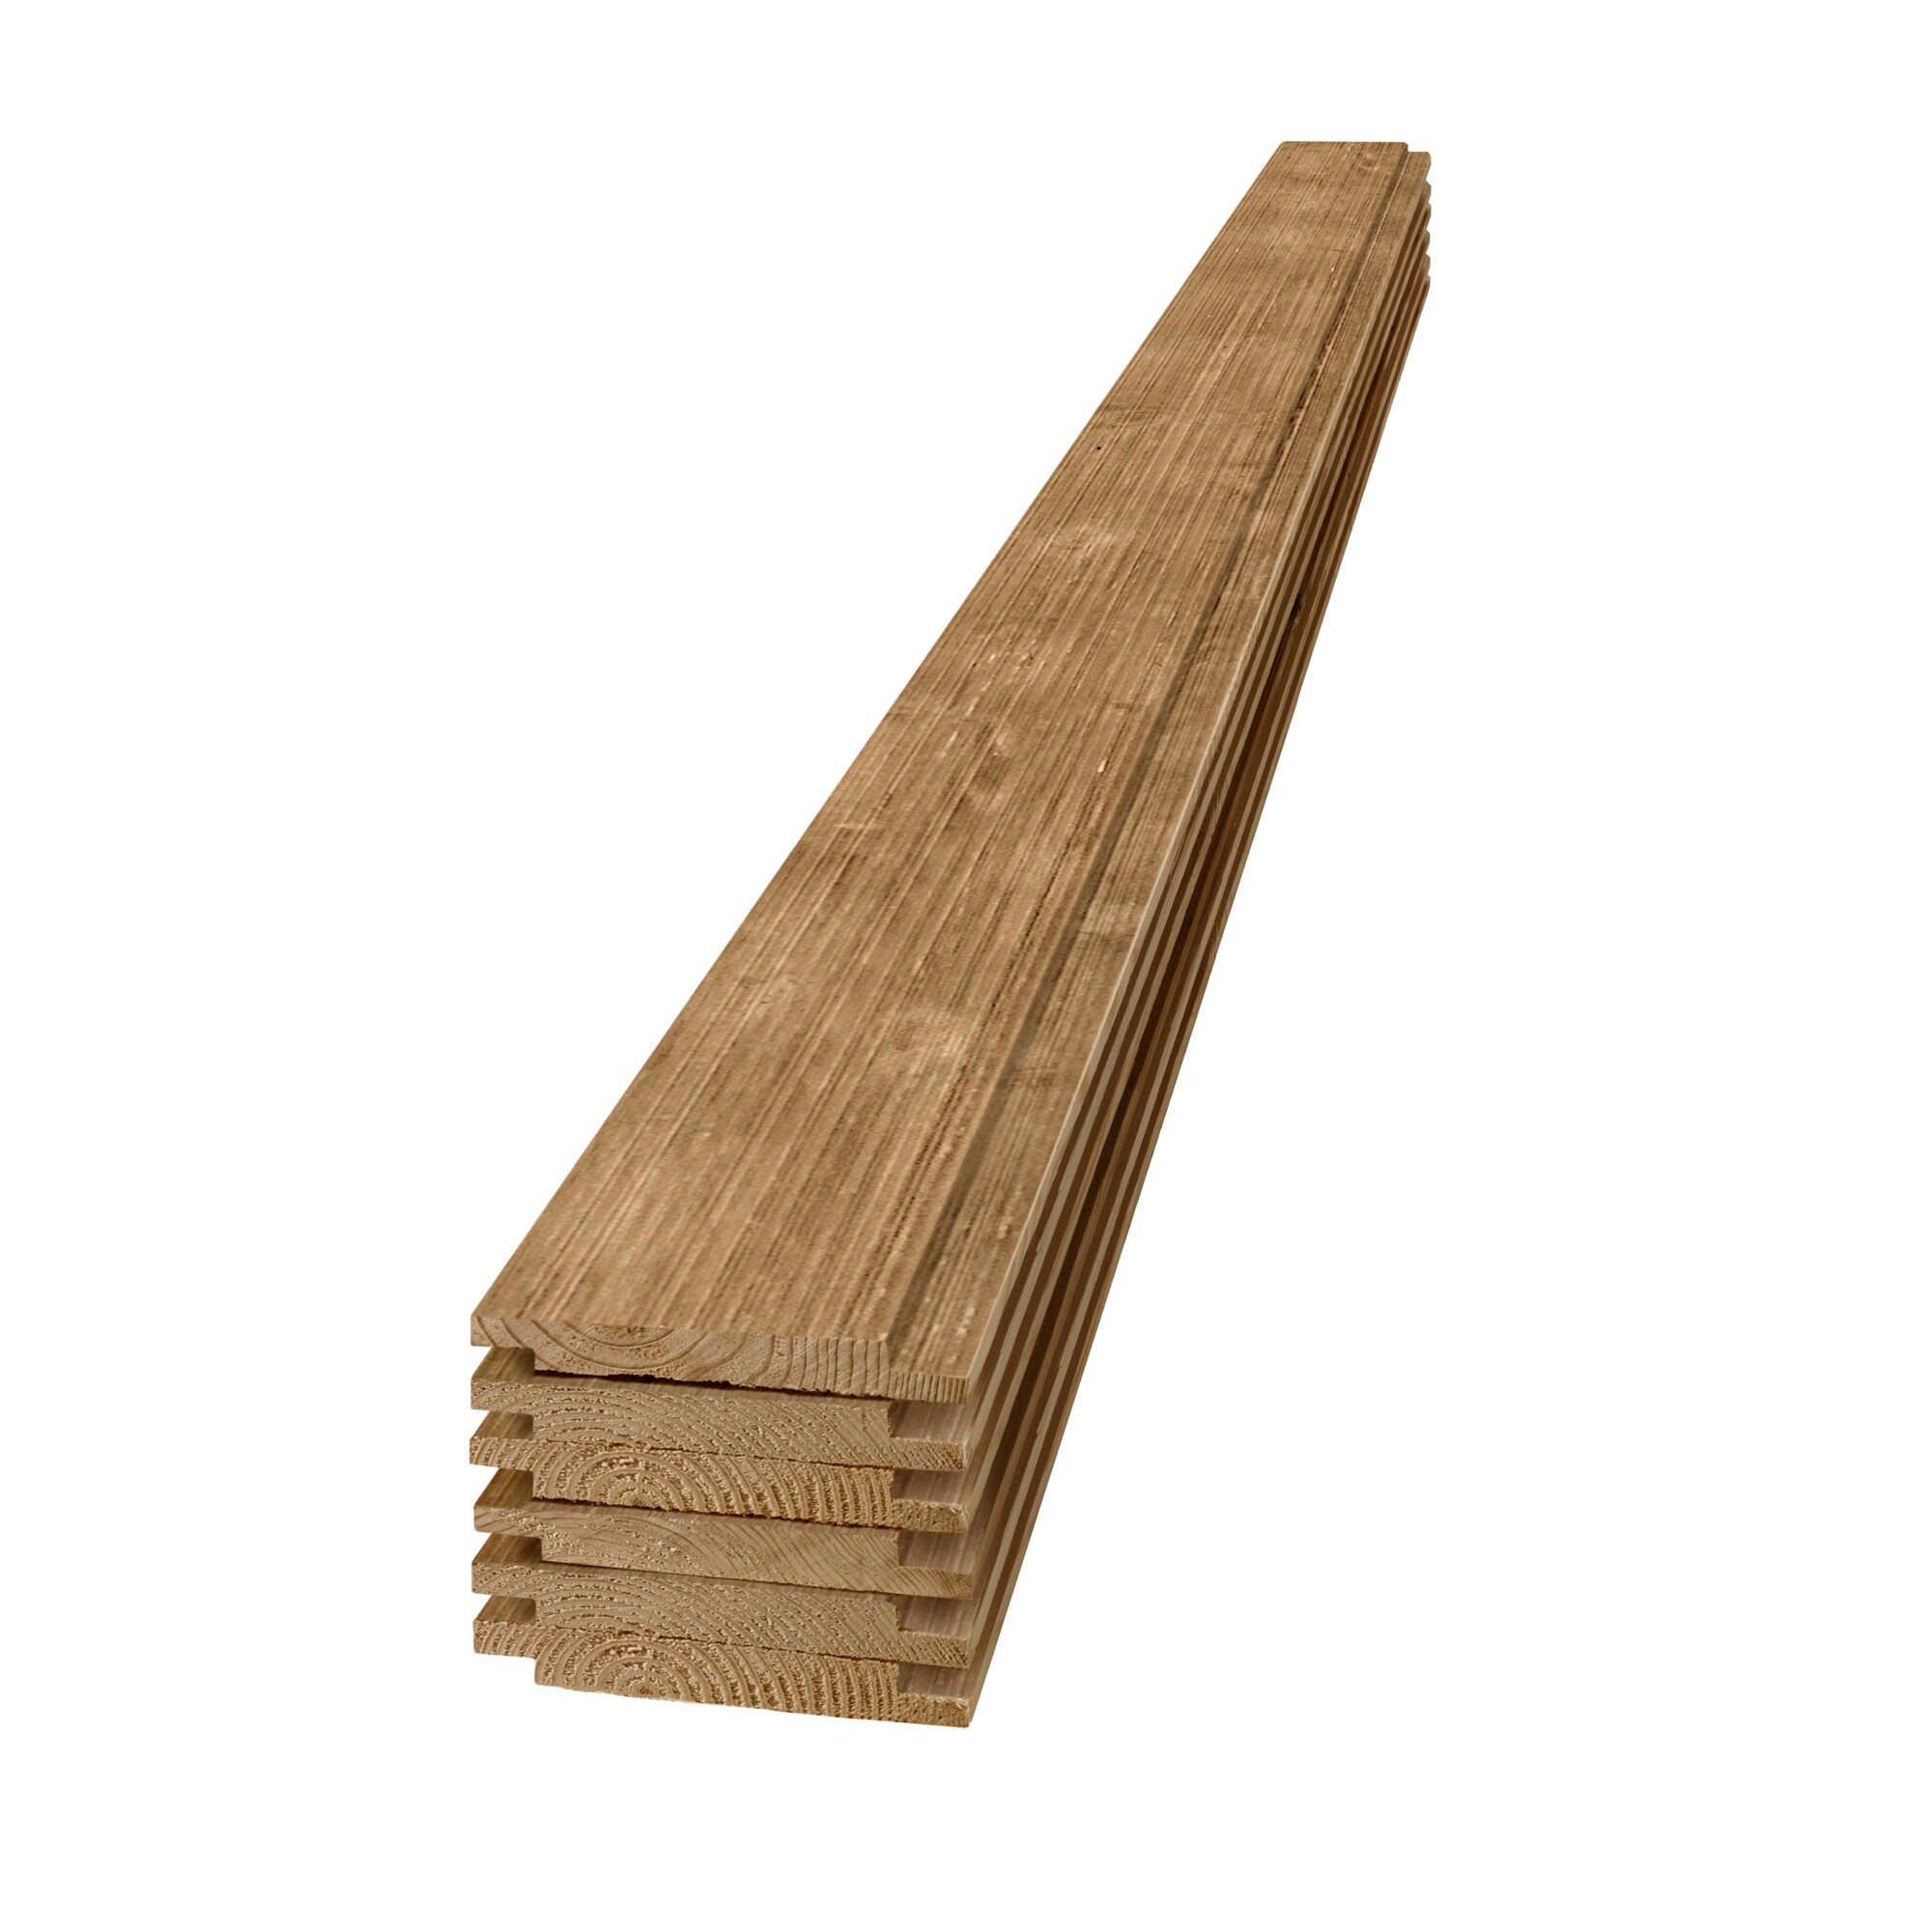 The Wood Plank